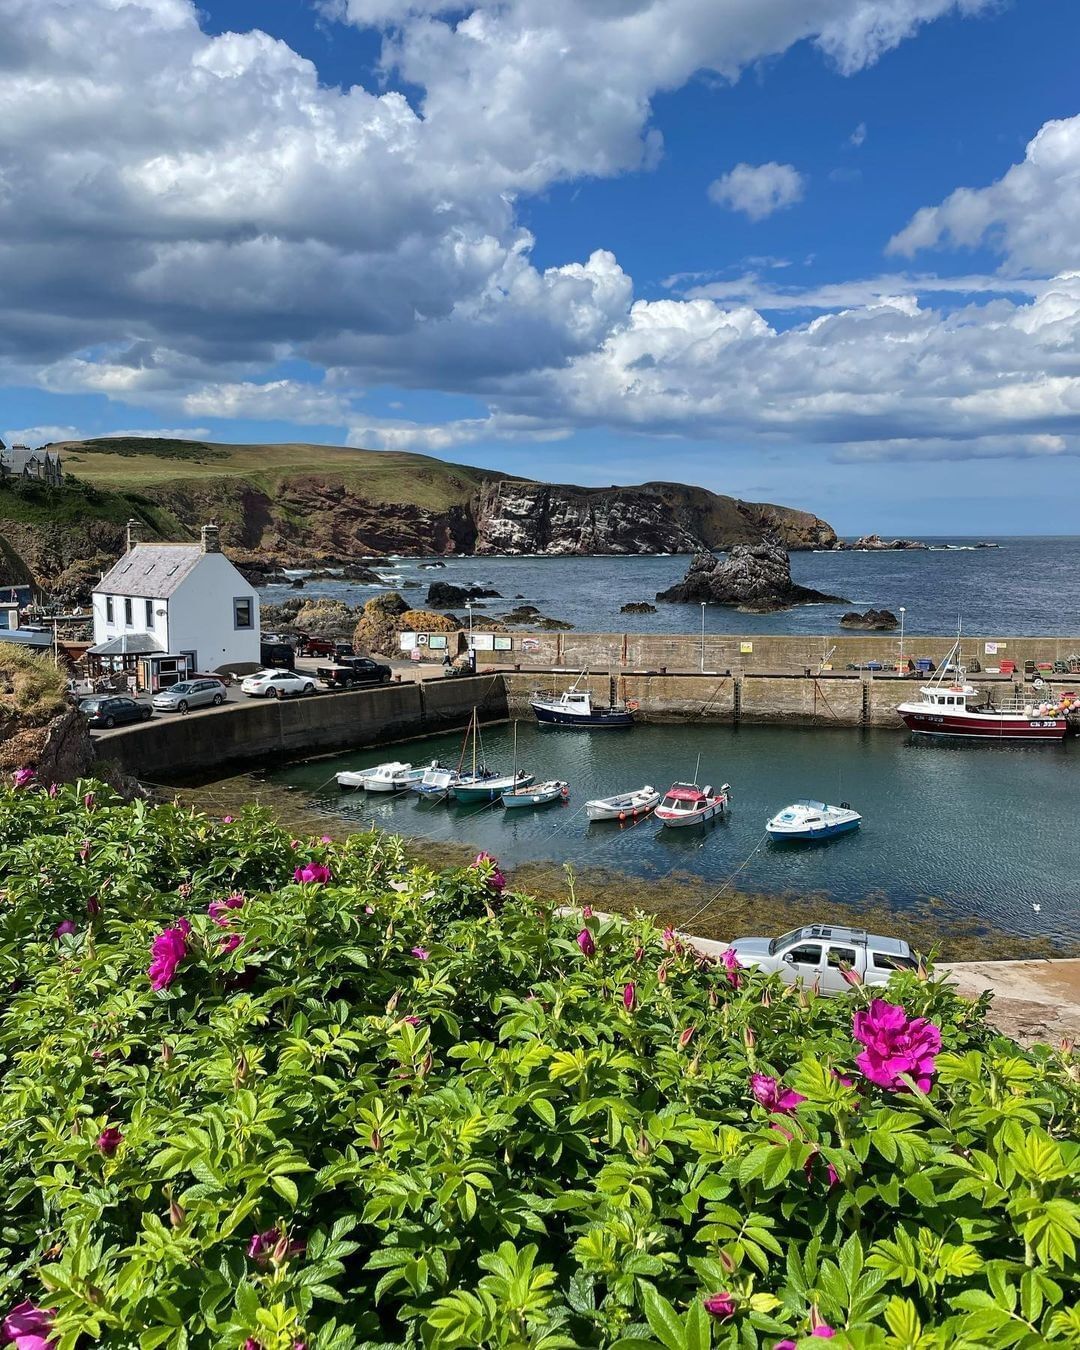 A walk along the coast of Berwickshire. Bright impressions and interesting landmarks from Scotland to England